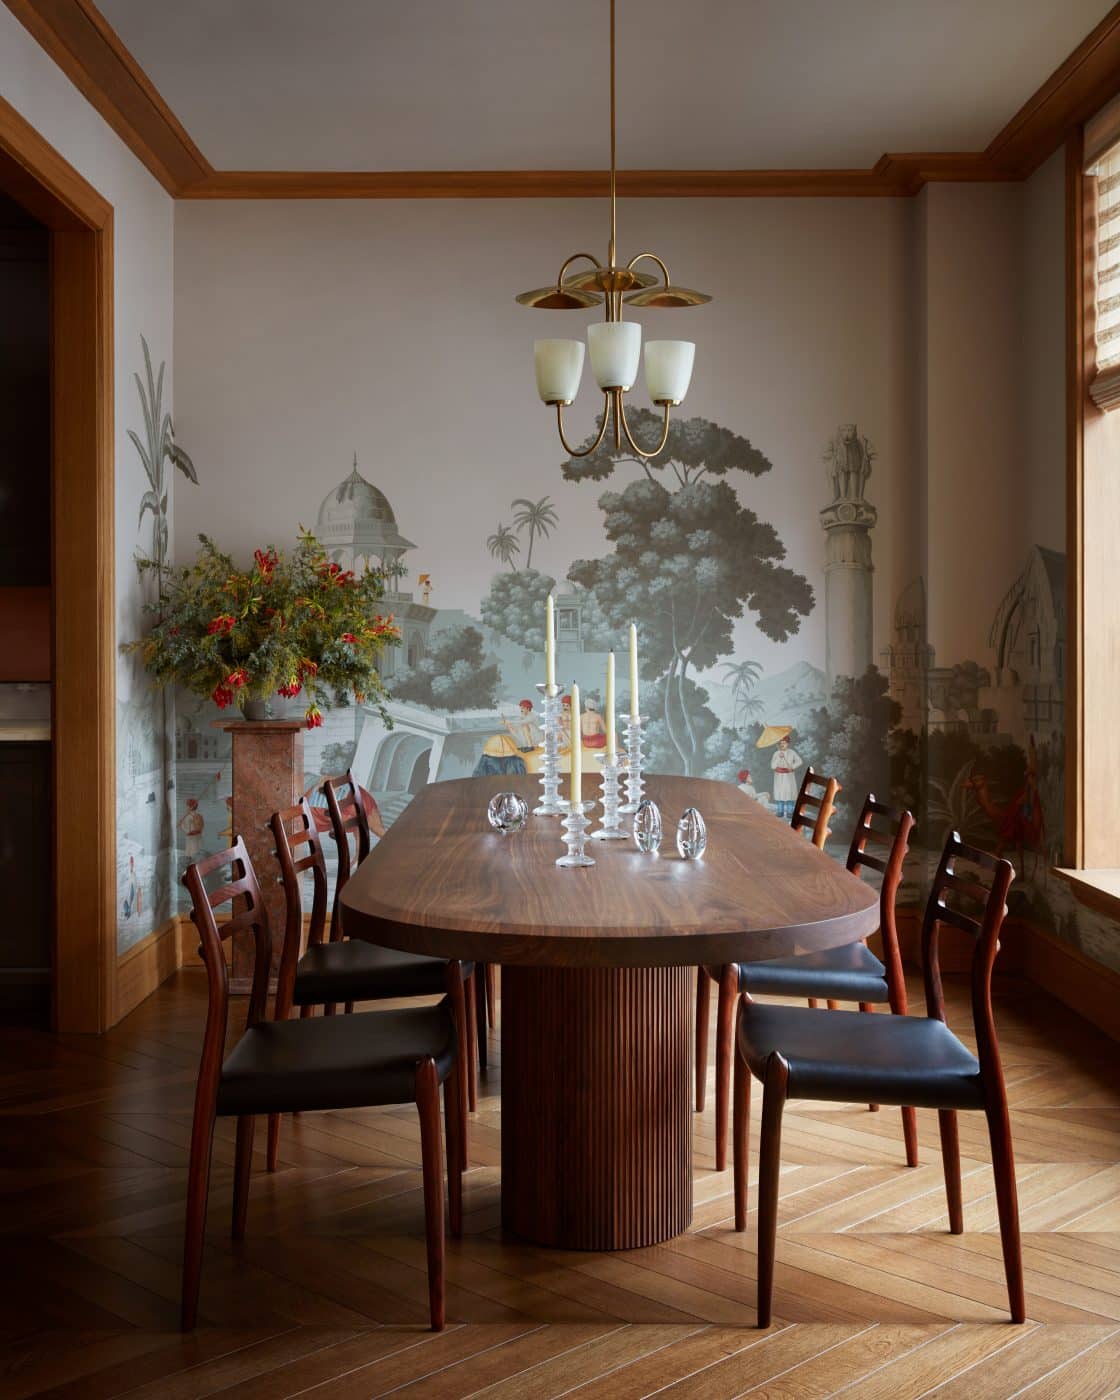 Dining room of apartment in Fitzroy building in New York City by interior designer Shawn Henderson